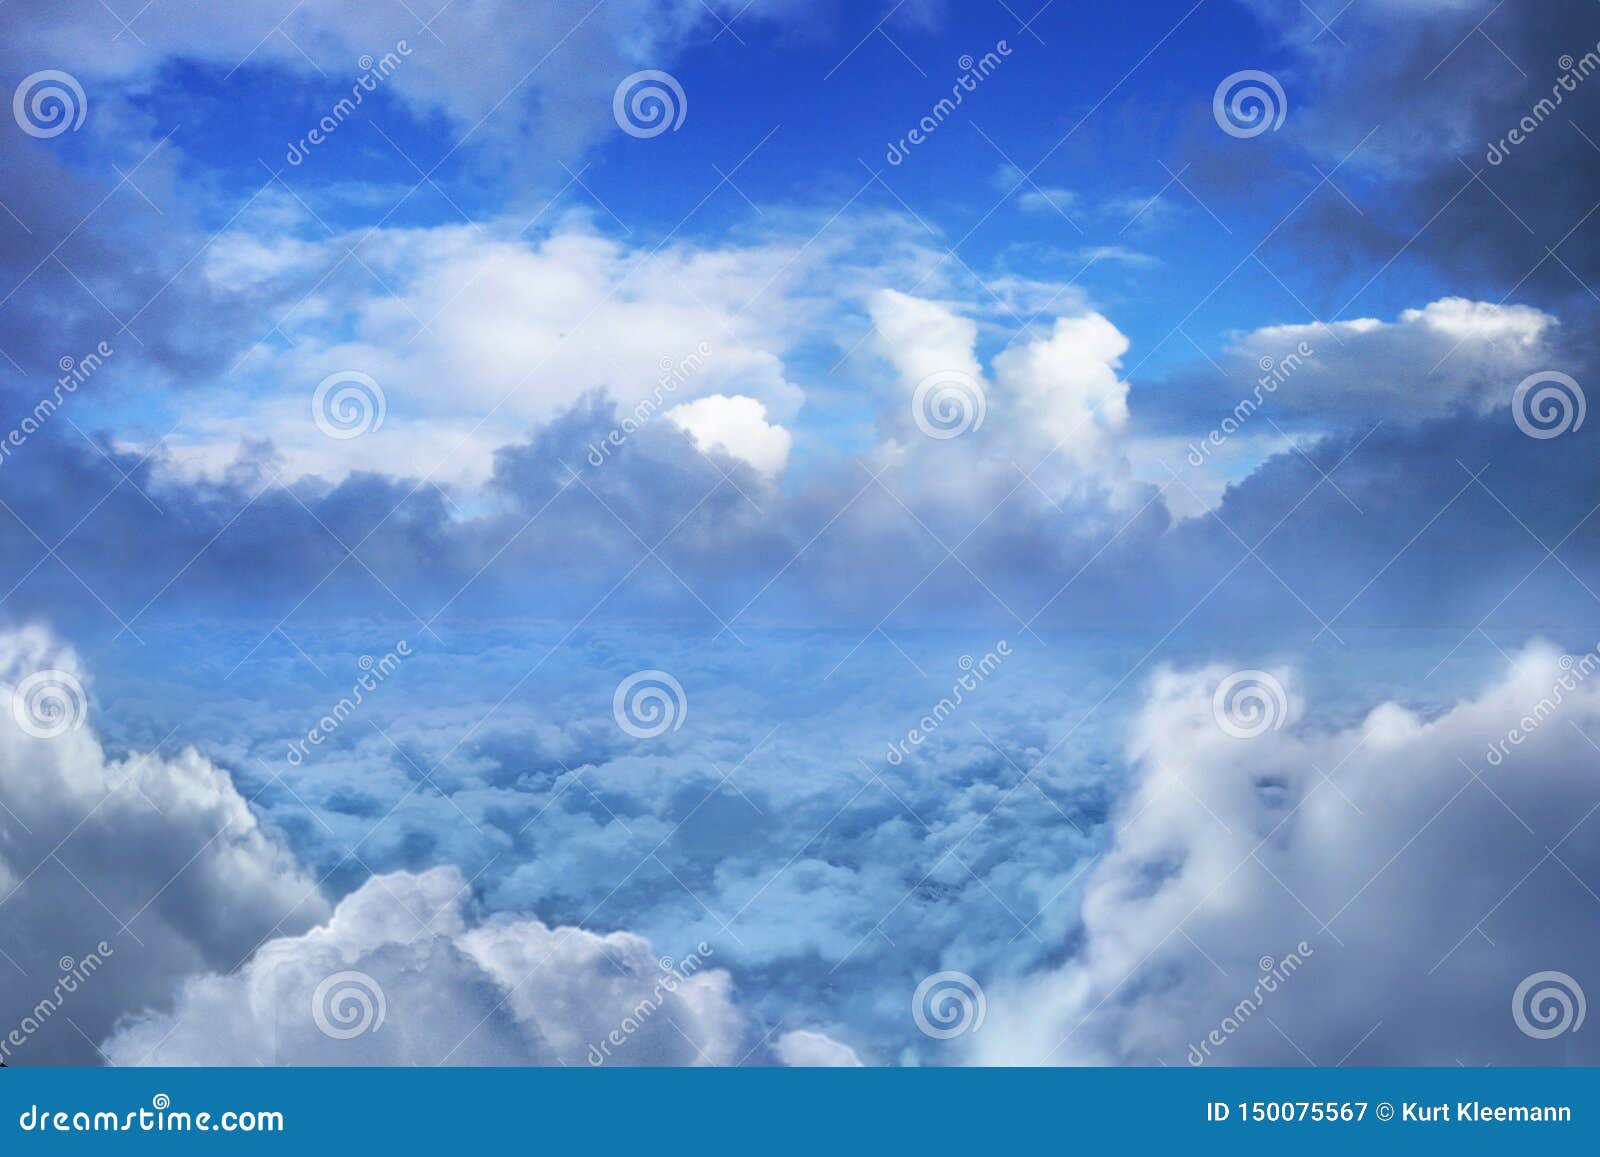 stratosphere, abstraction of a scene over the clouds